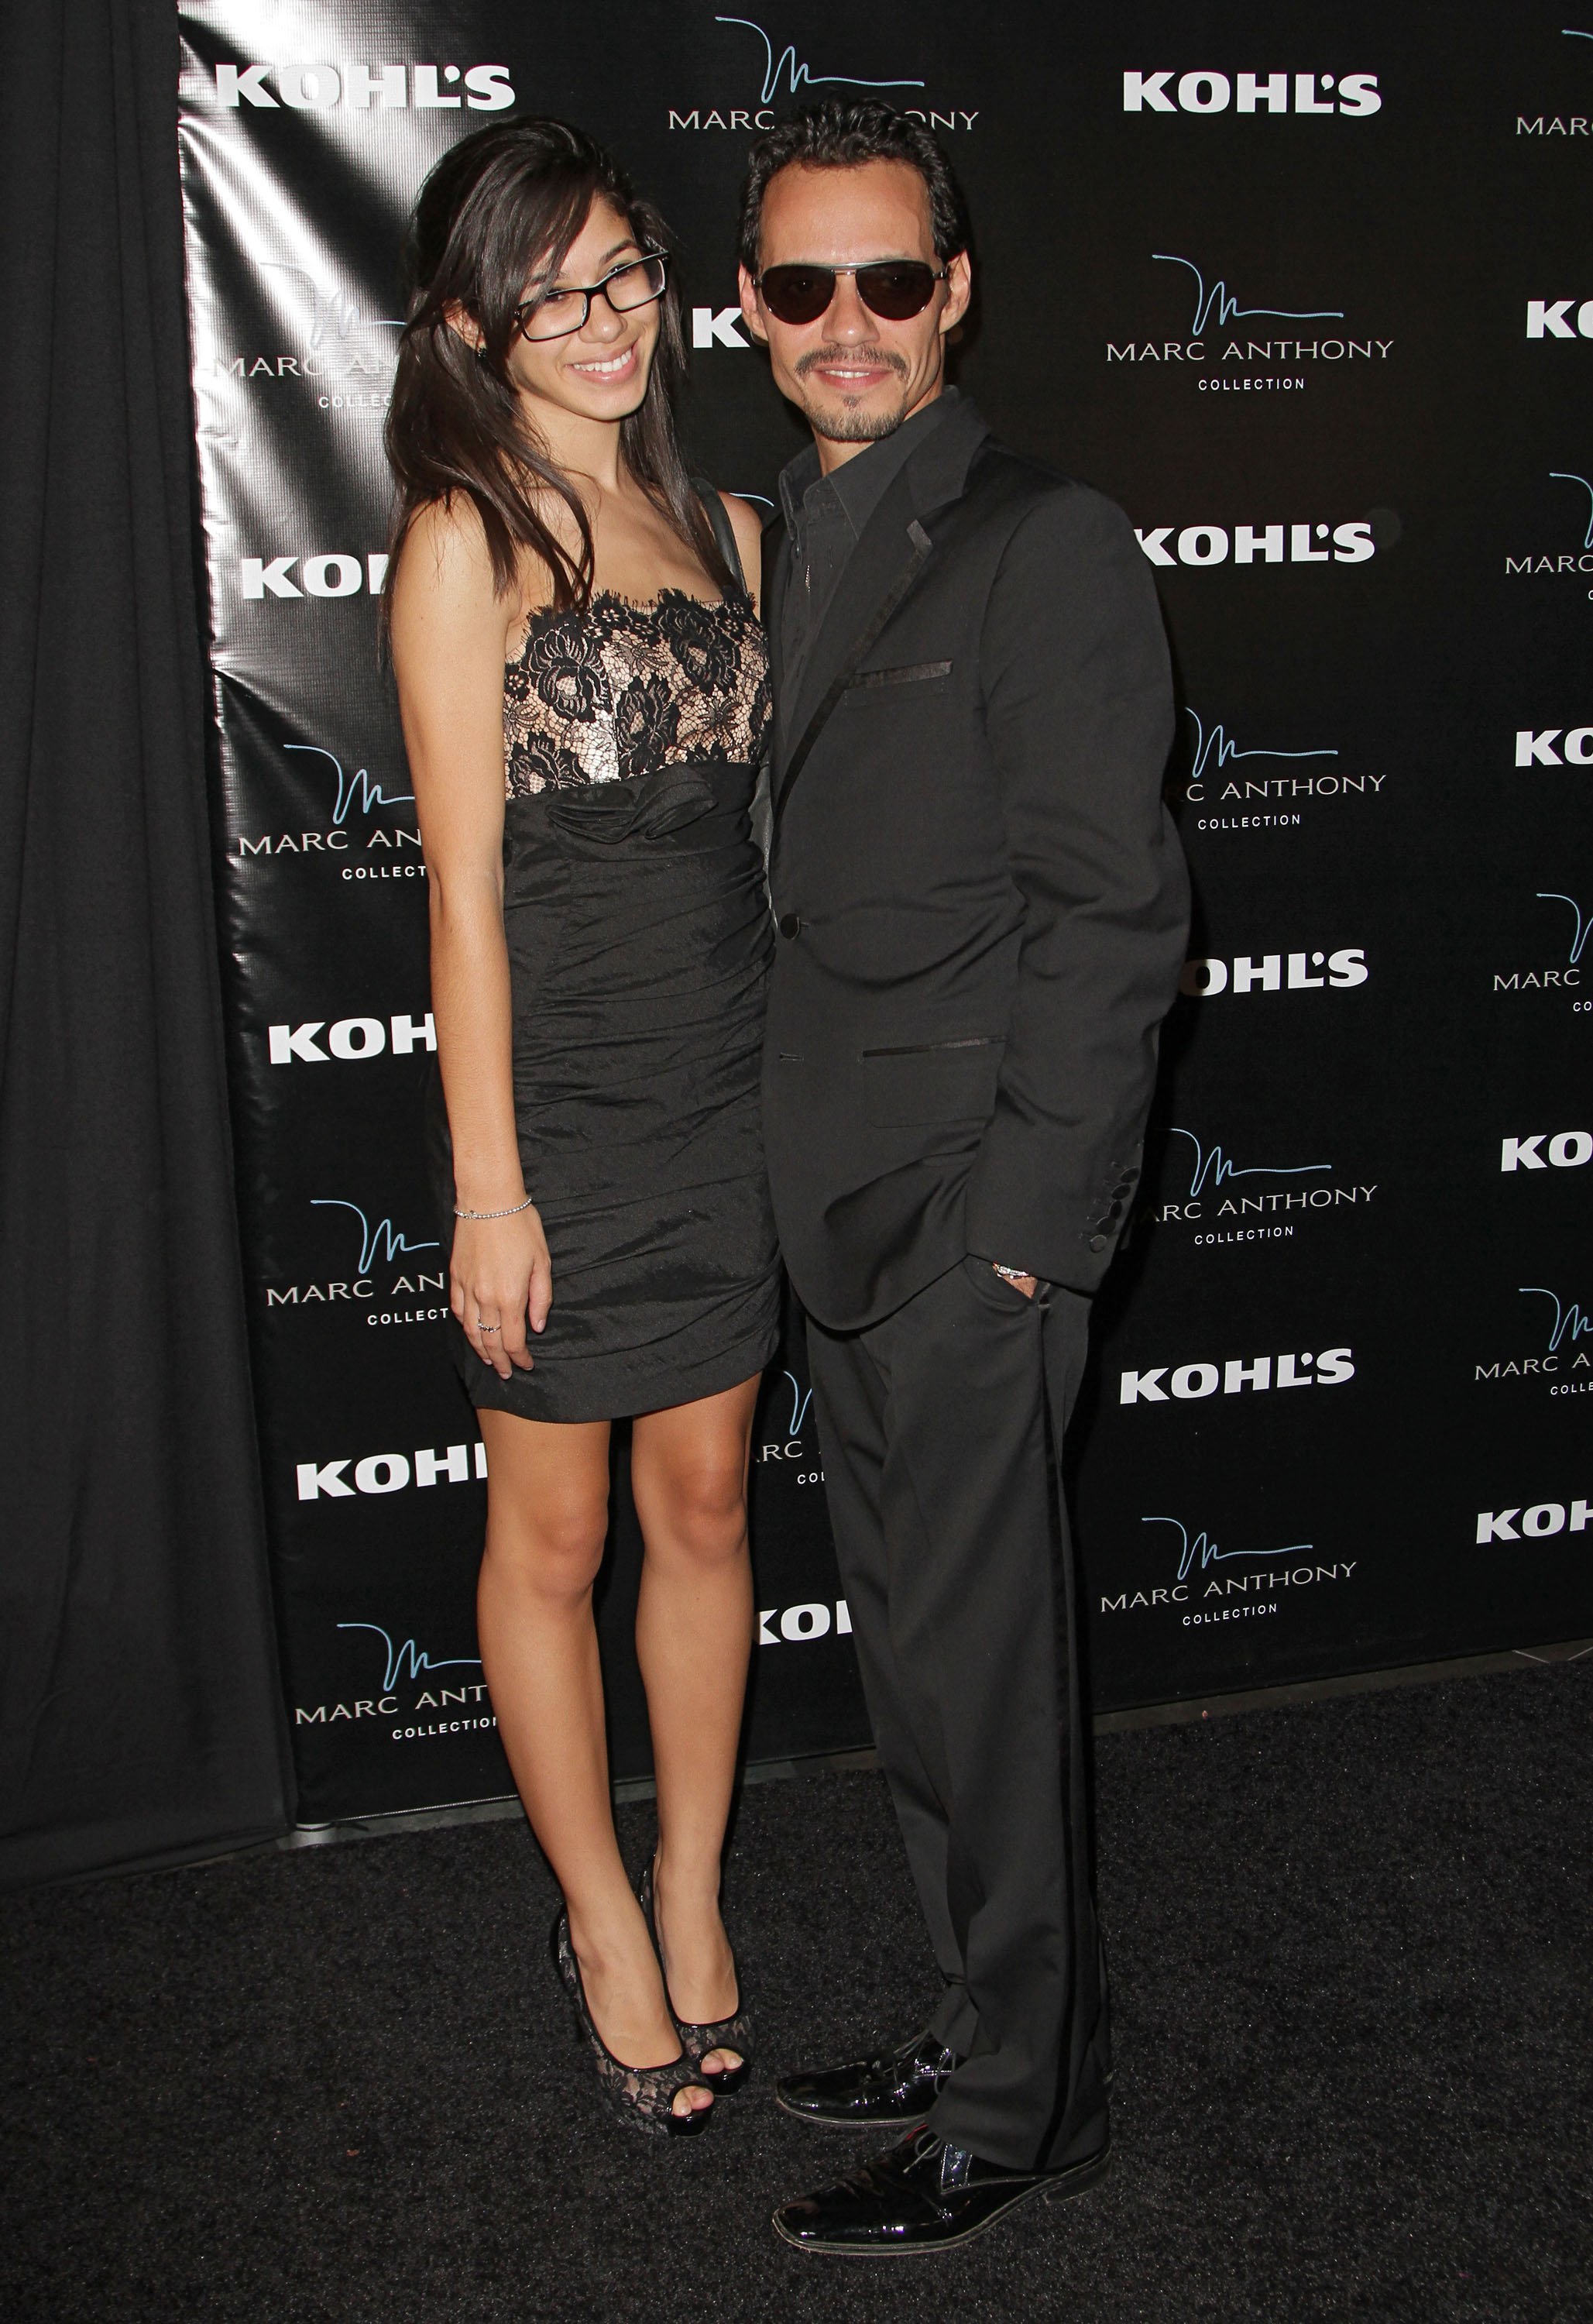 Marc Anthony and Ariana at Marc Anthony's 43rd birthday party at Club 50 at Viceroy Miami in Miami, Florida, on September 16, 2011. | Source: Getty Images